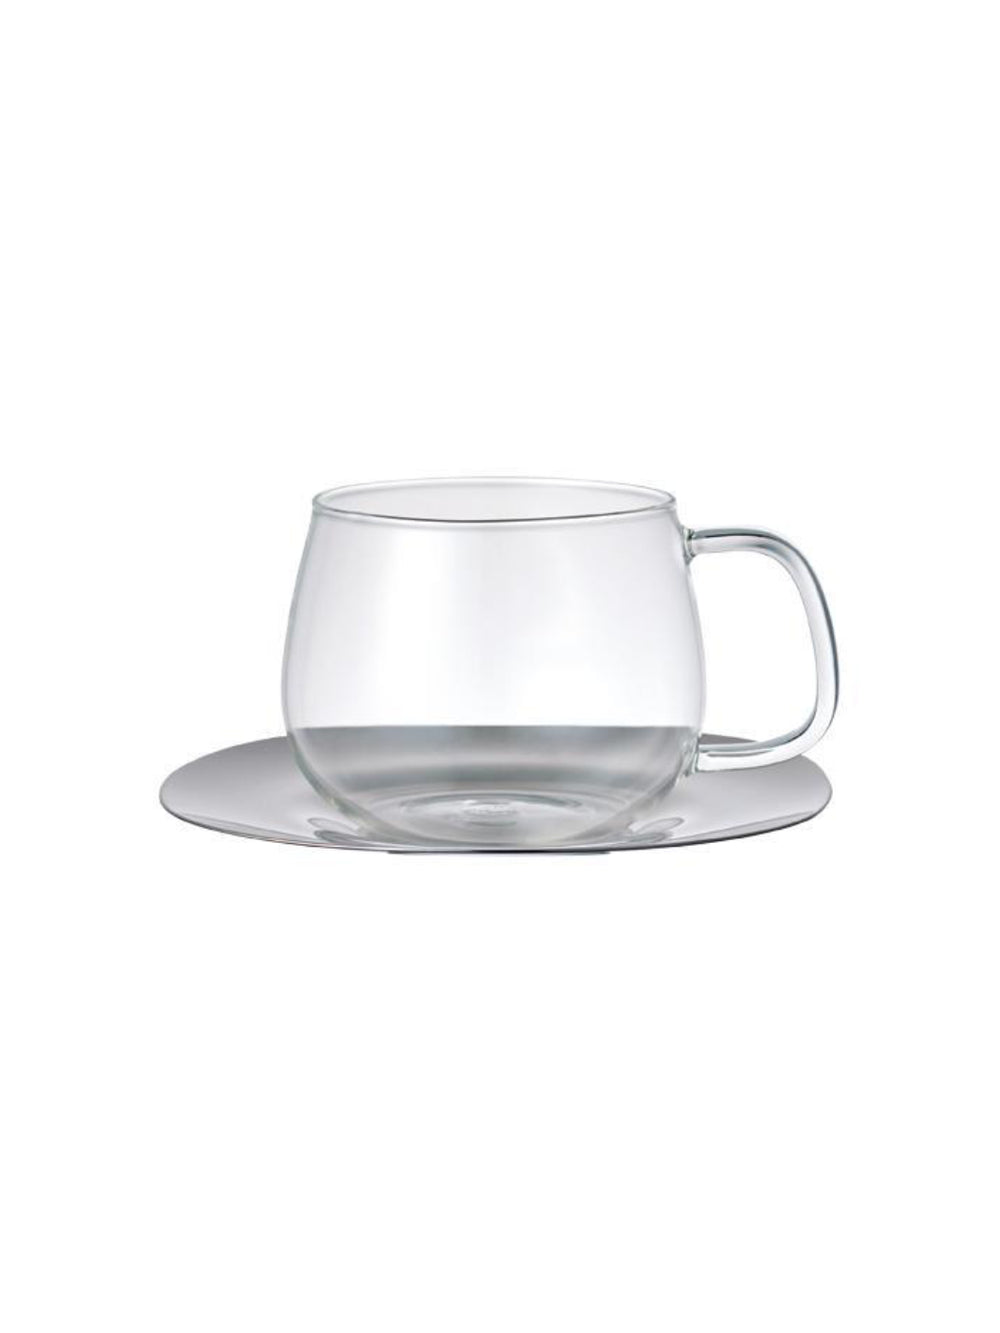 https://cdn.shopify.com/s/files/1/2404/0687/products/kinto_8338_unitea-cup-saucer-350ml_stainless-steel.jpg?v=1654891123&width=1000